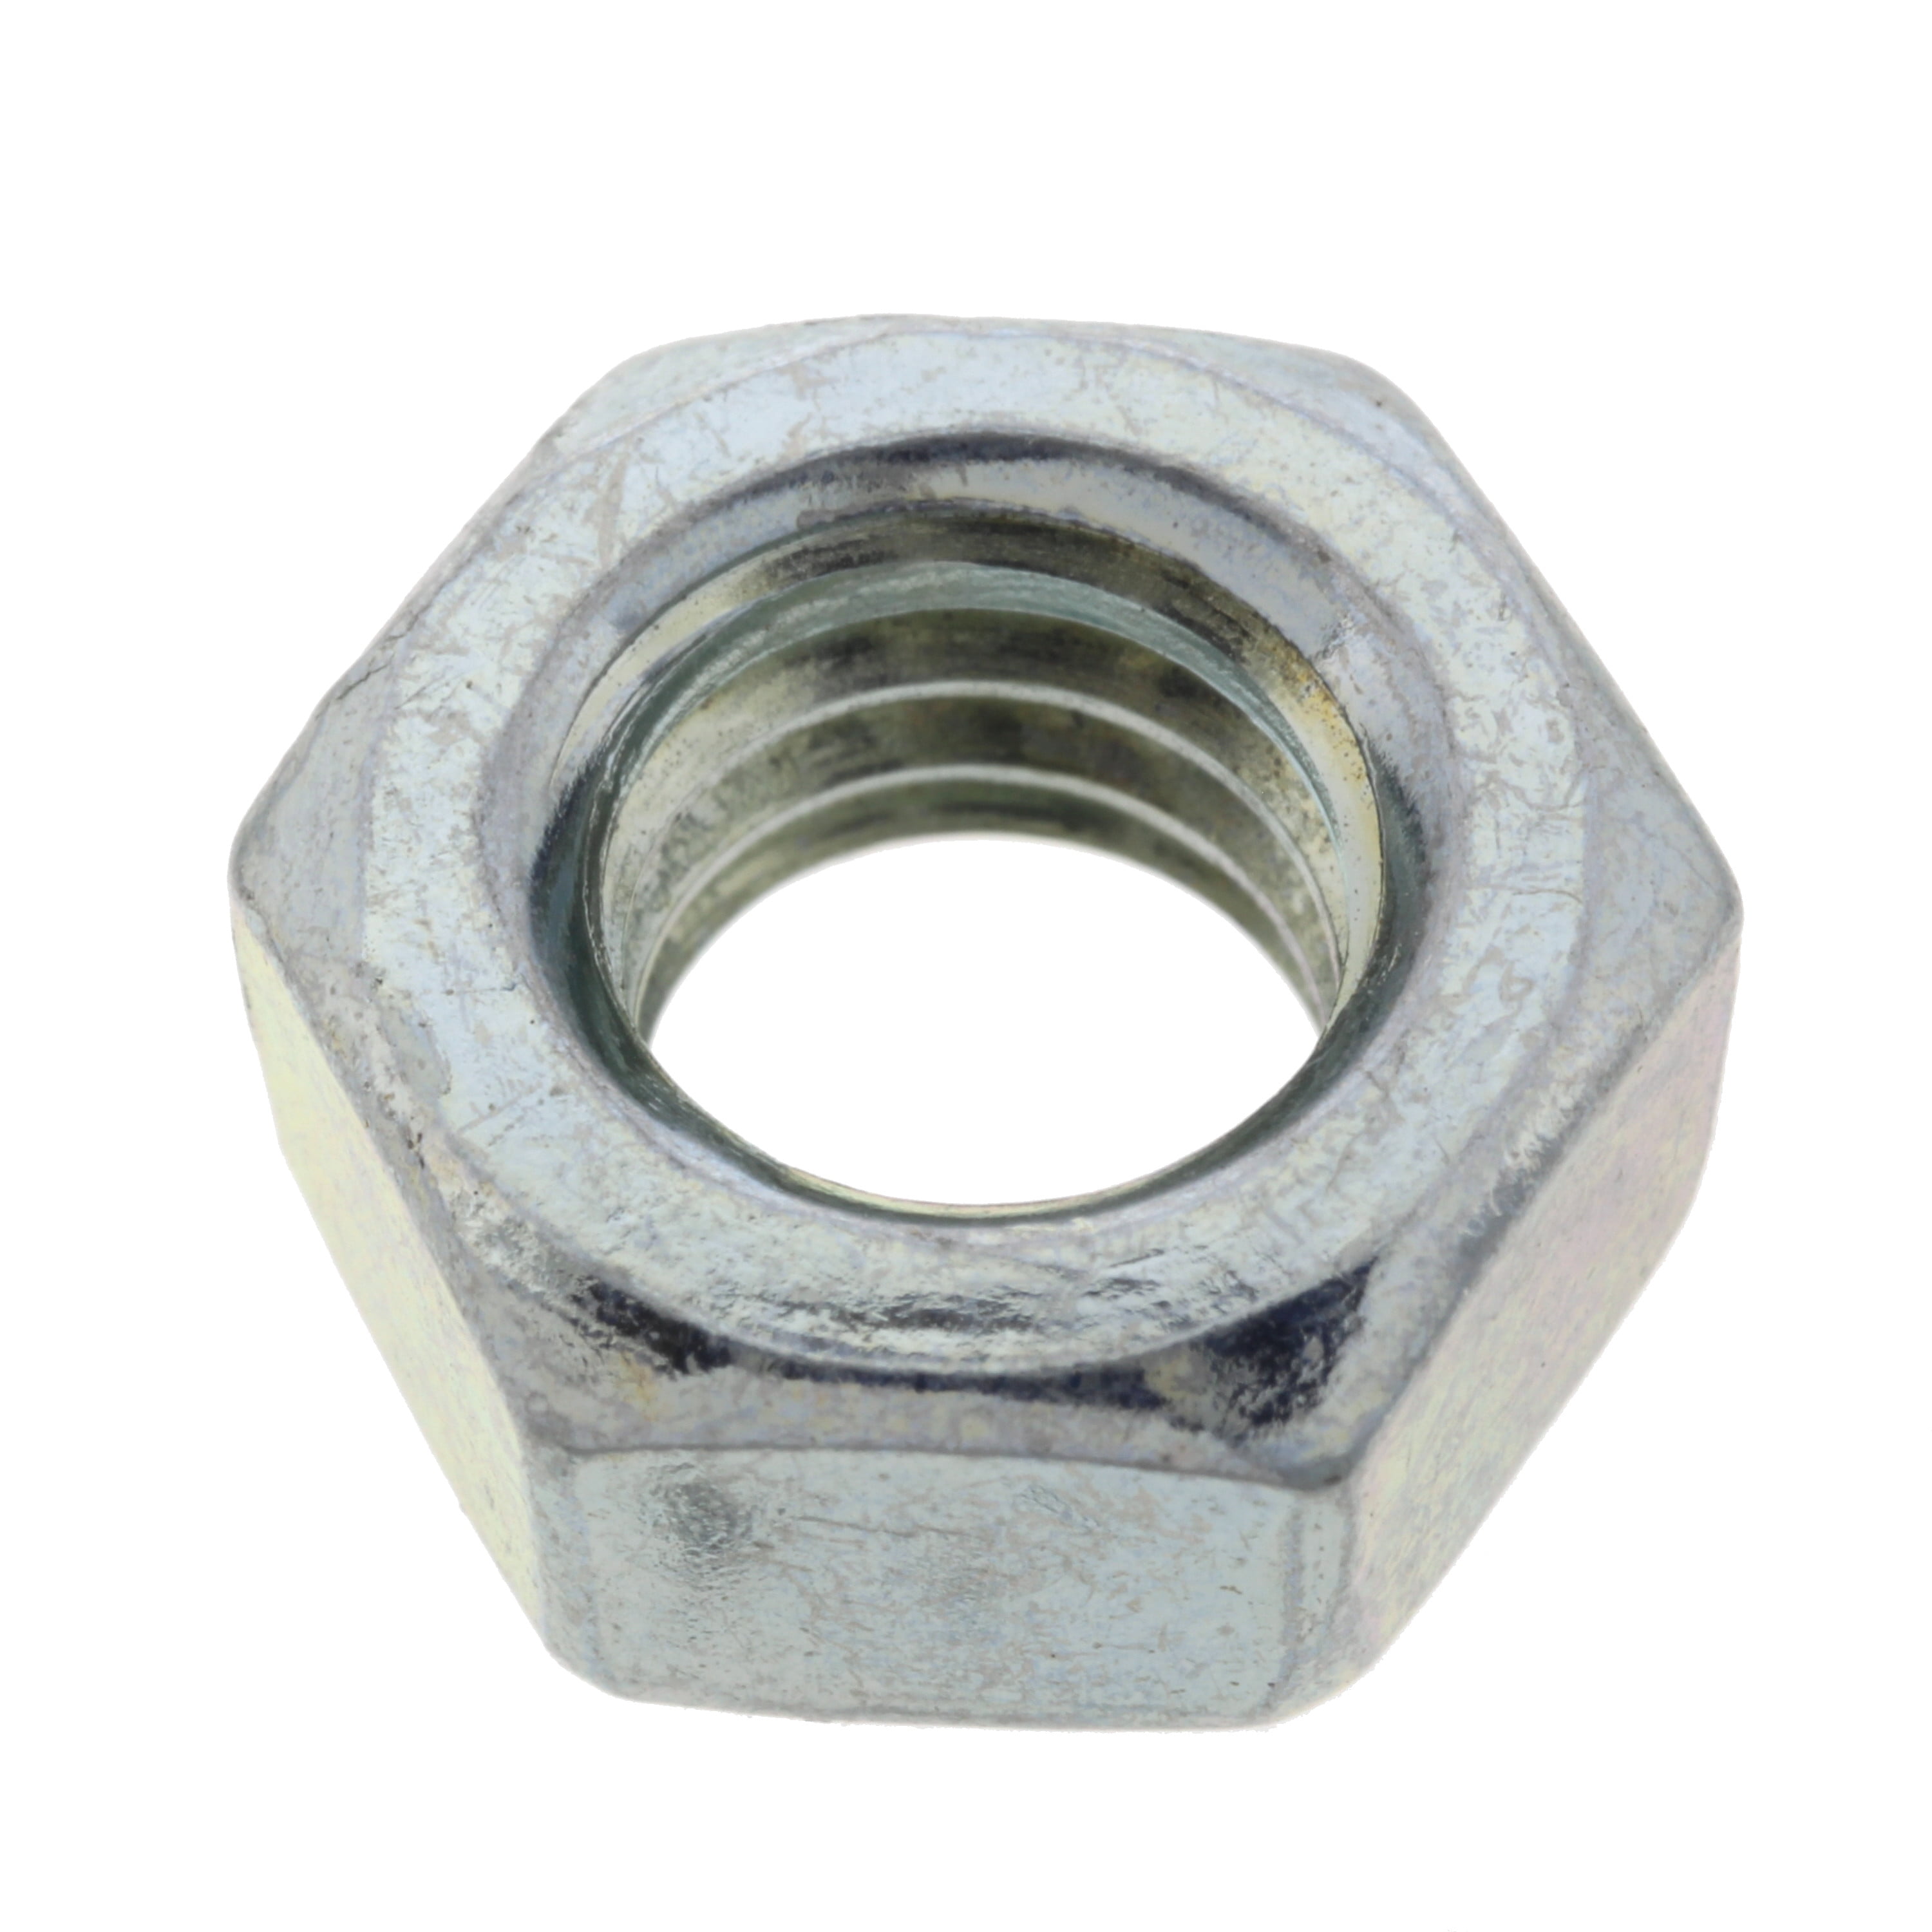 5/16-18 Finished Hex Nut Zinc Plated Free Shipping 